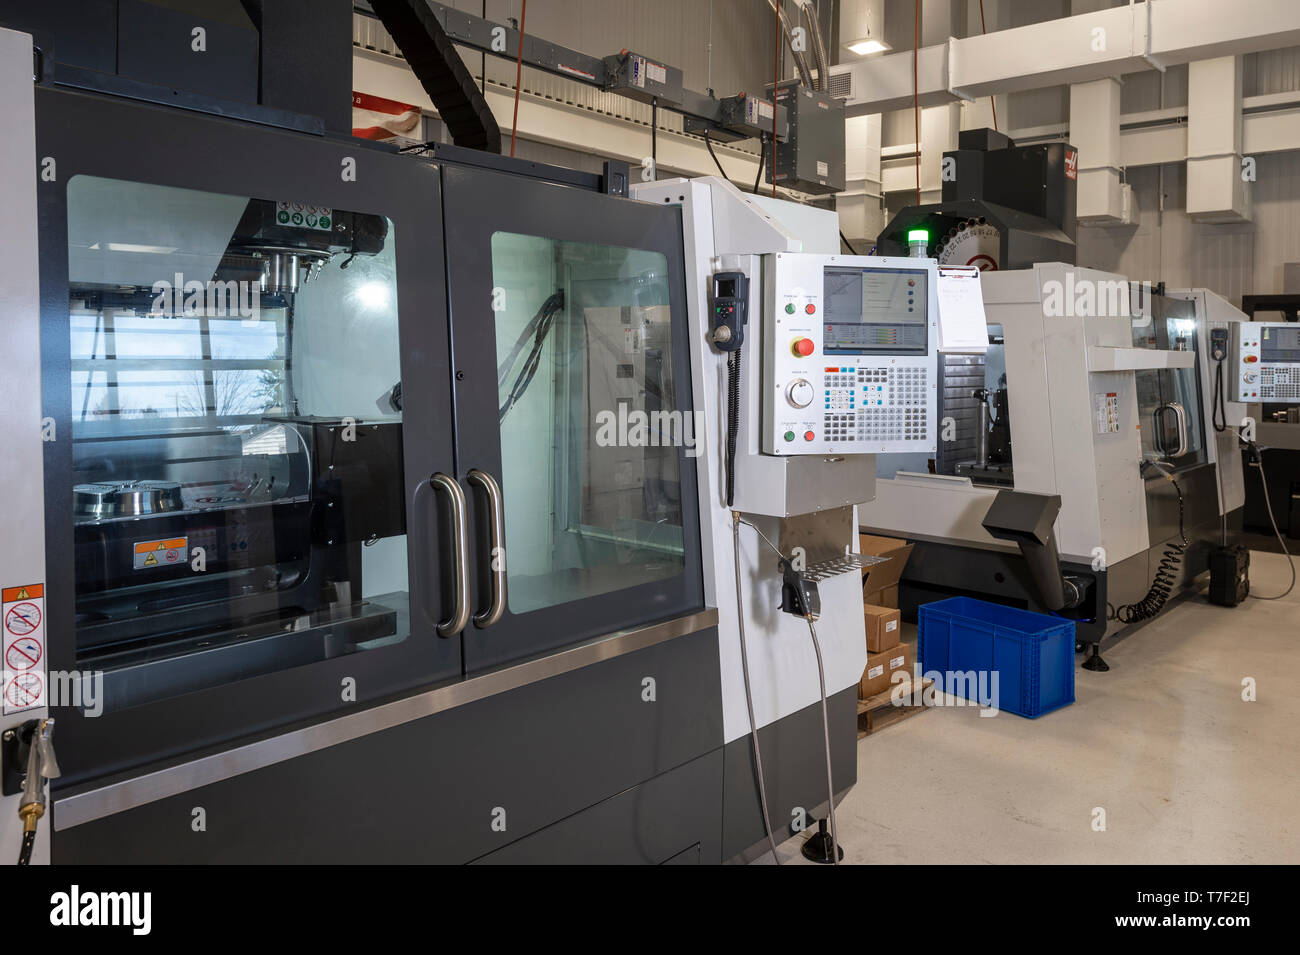 Automated Milling Lathe Machines In Factory Stockfoto